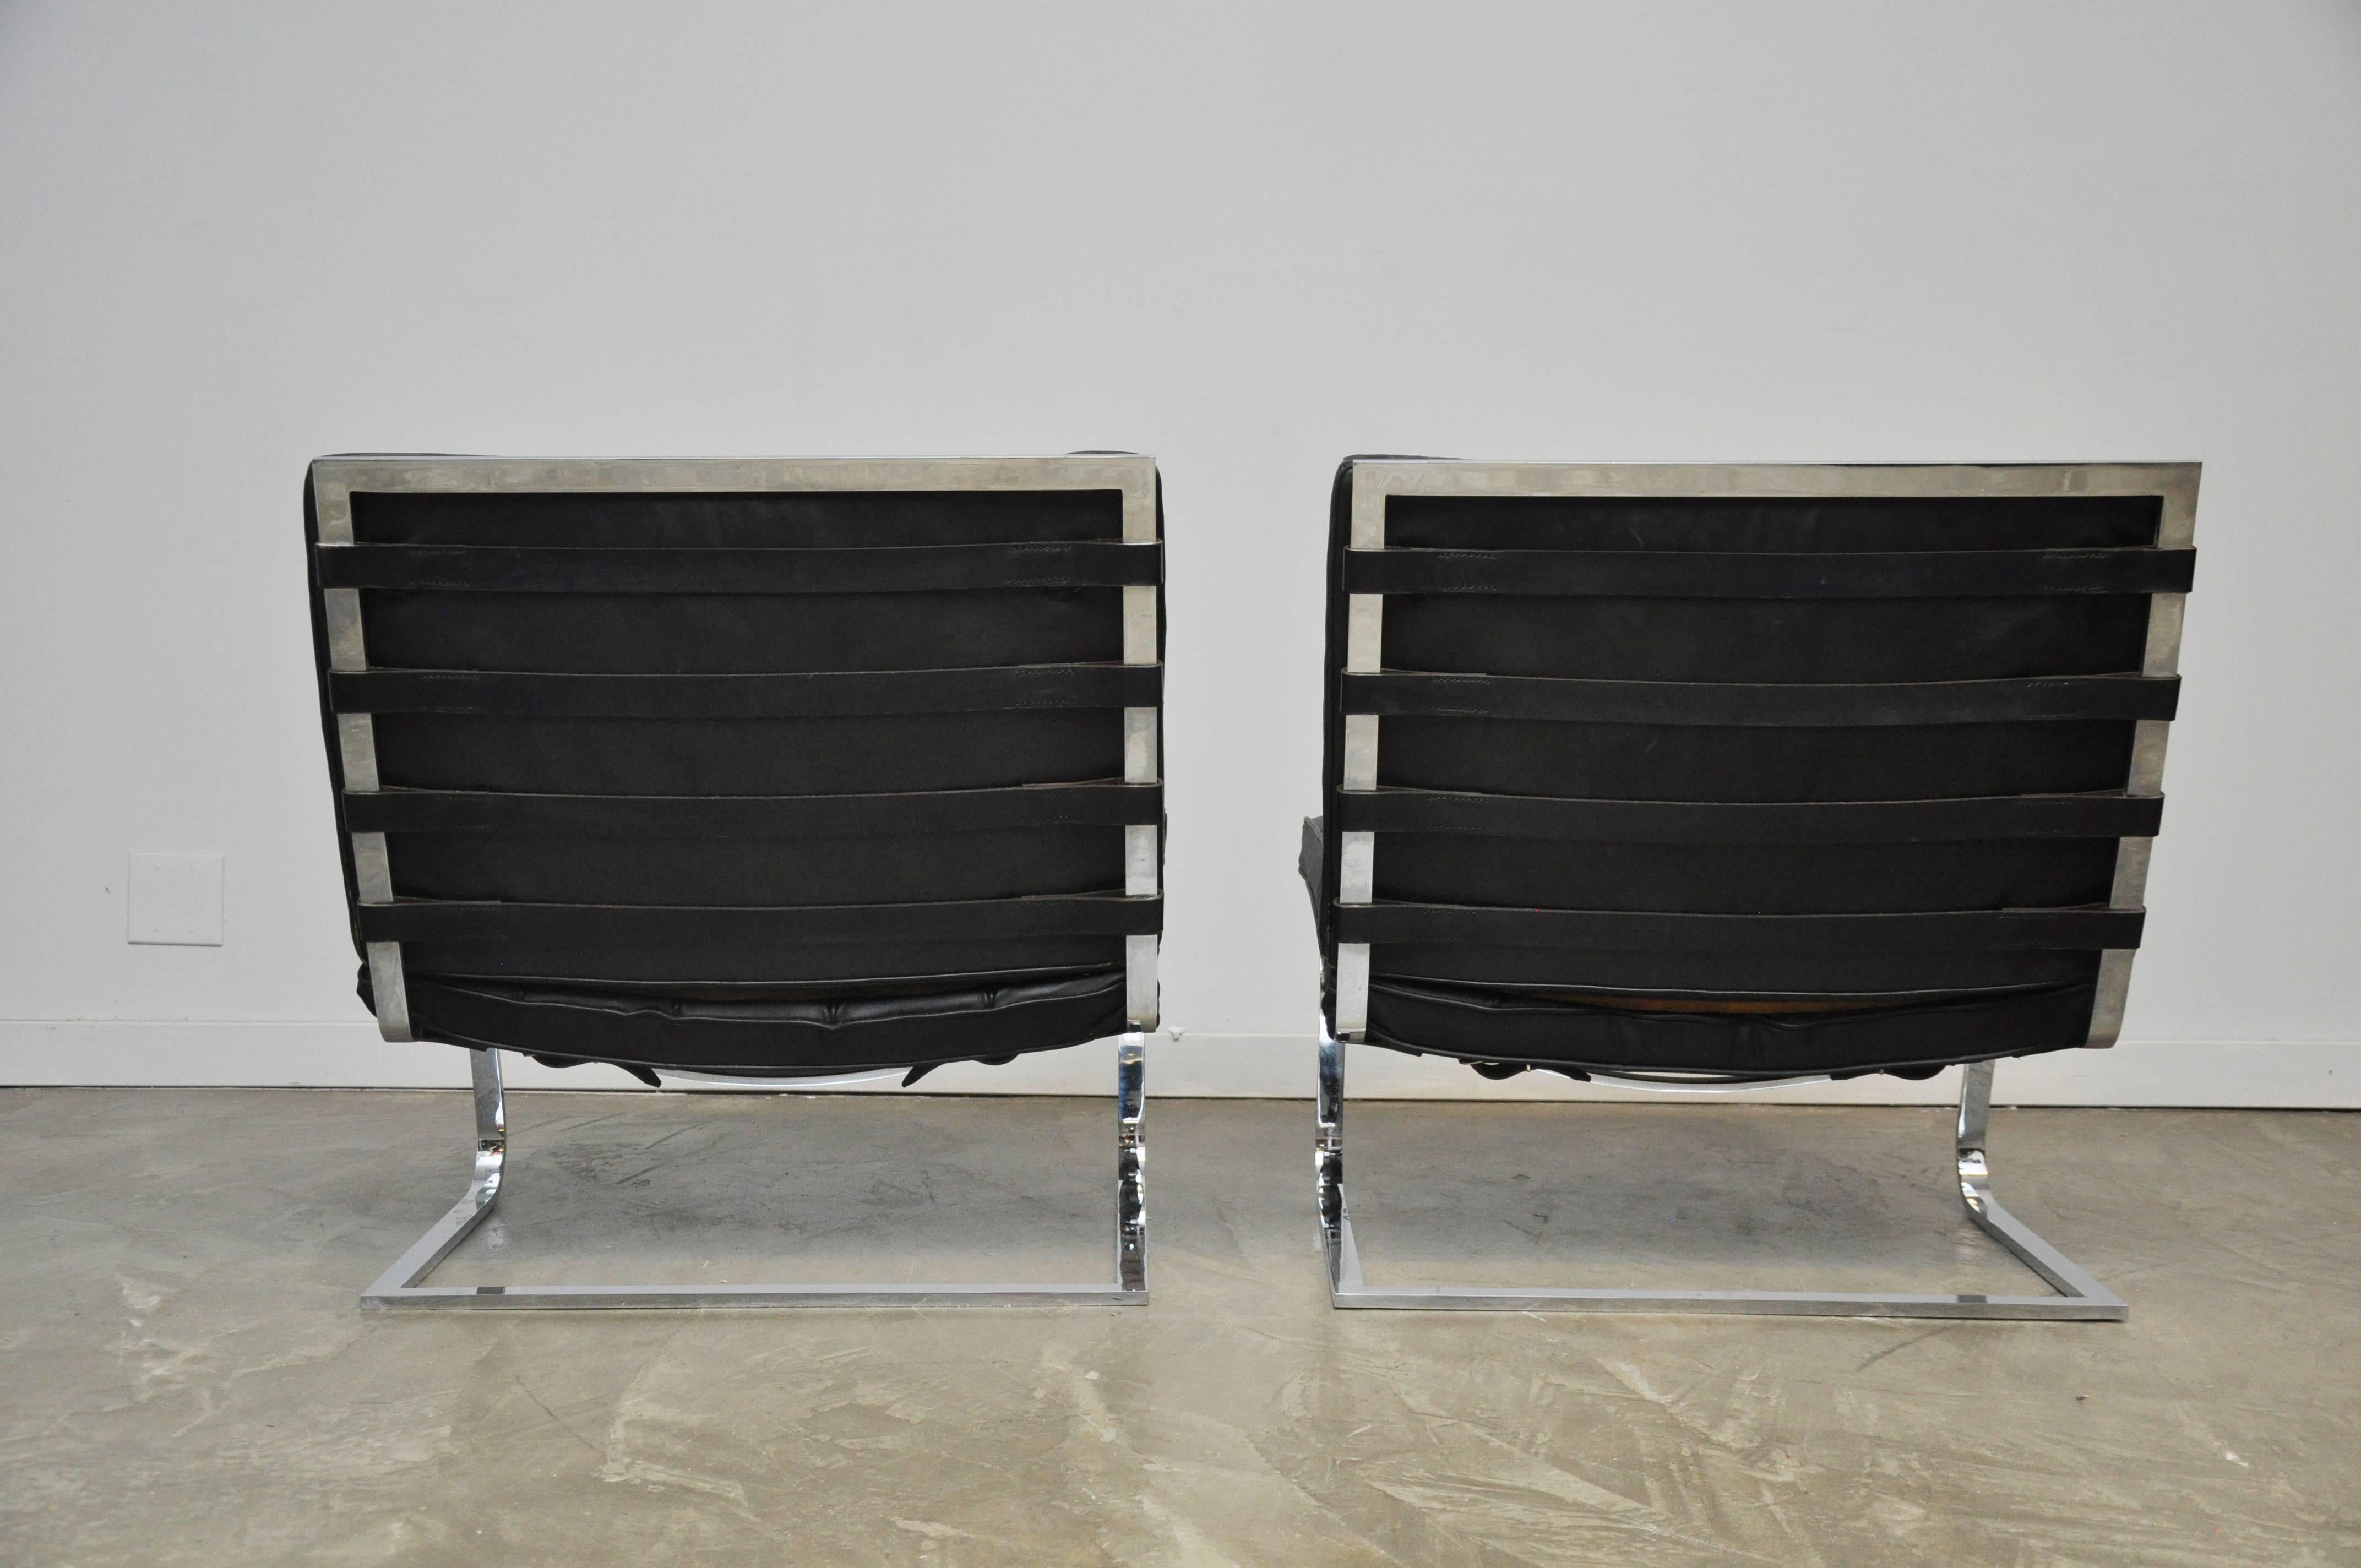 20th Century Mies Van Der Rohe Tugendhat Lounge Chairs for Knoll